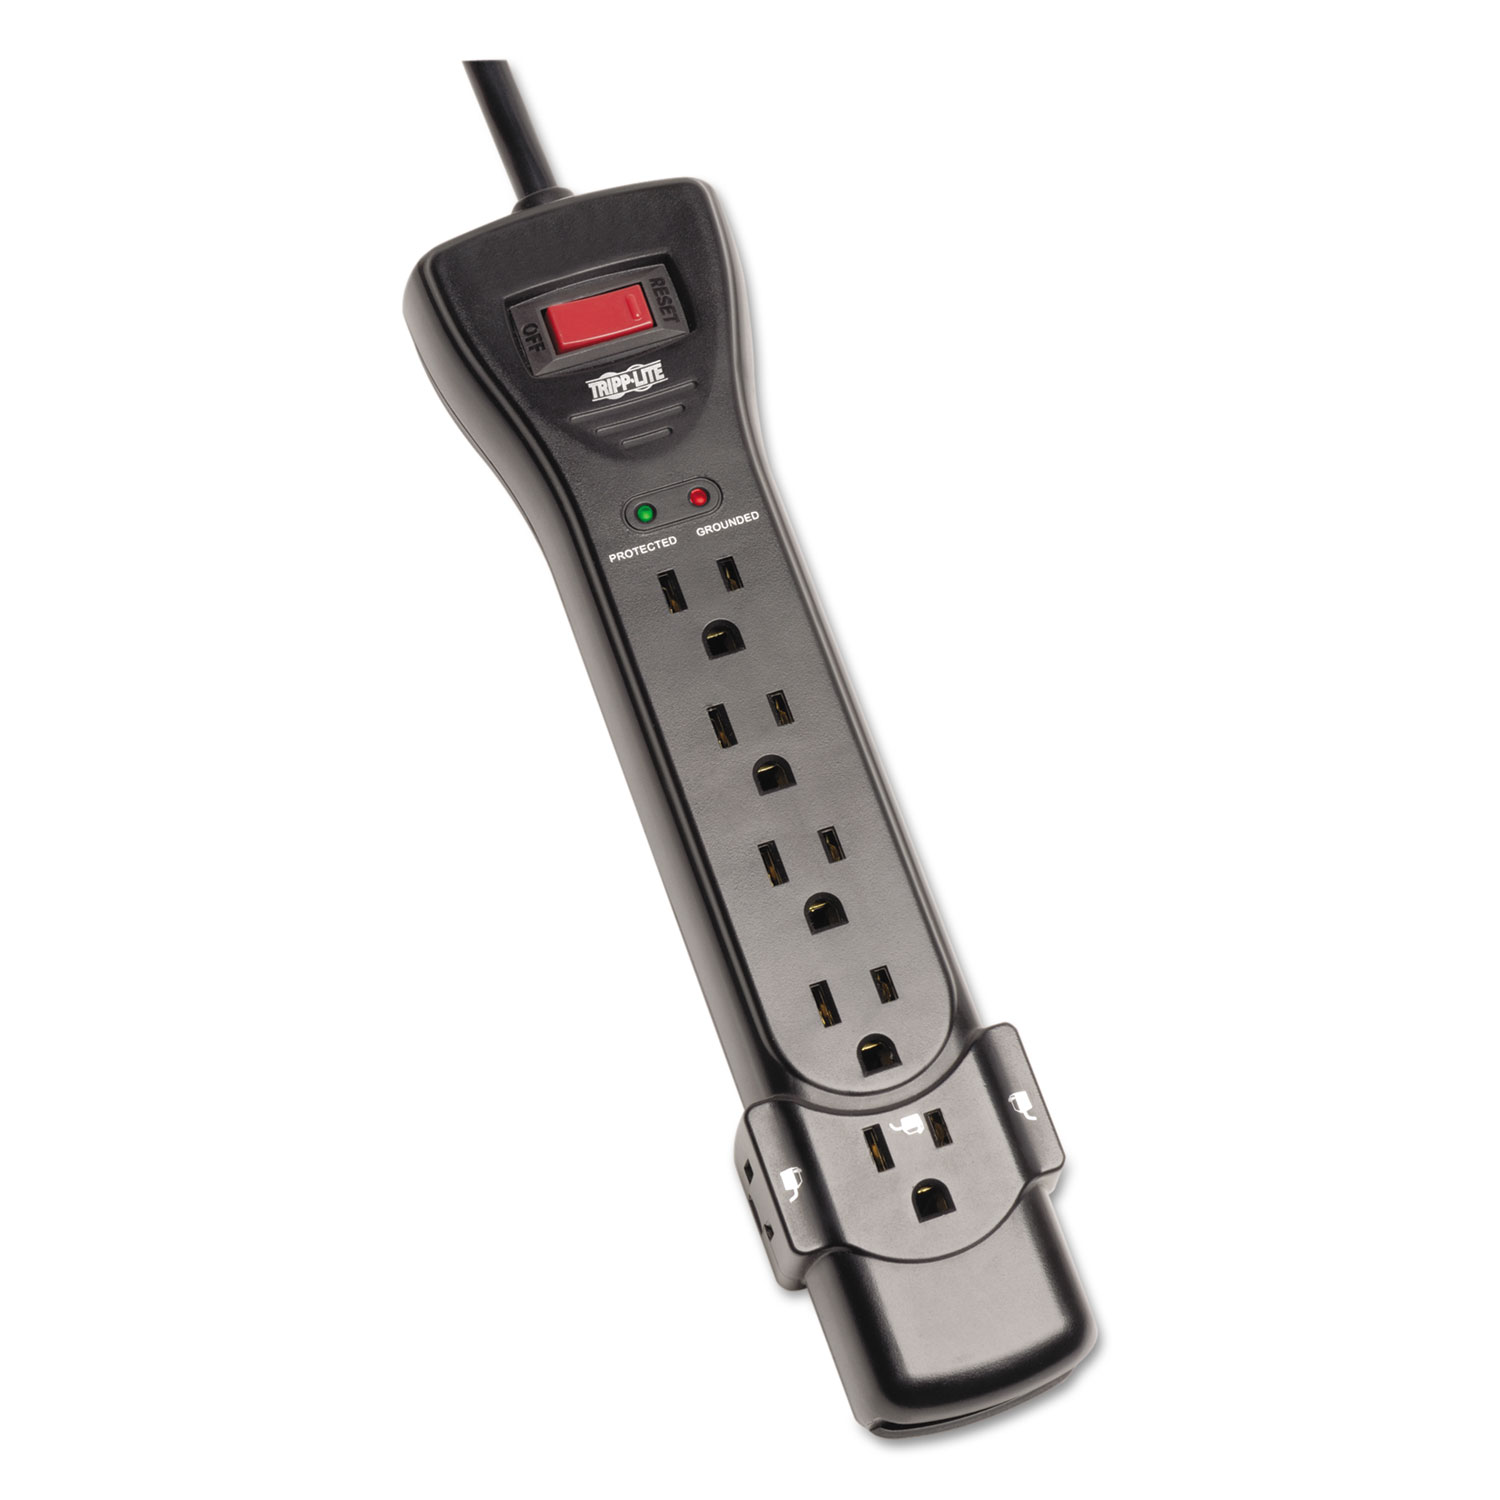  Tripp Lite SUPER7B Protect It! Surge Protector, 7 Outlets, 7 ft. Cord, 2160 Joules, Black (TRPSUPER7B) 